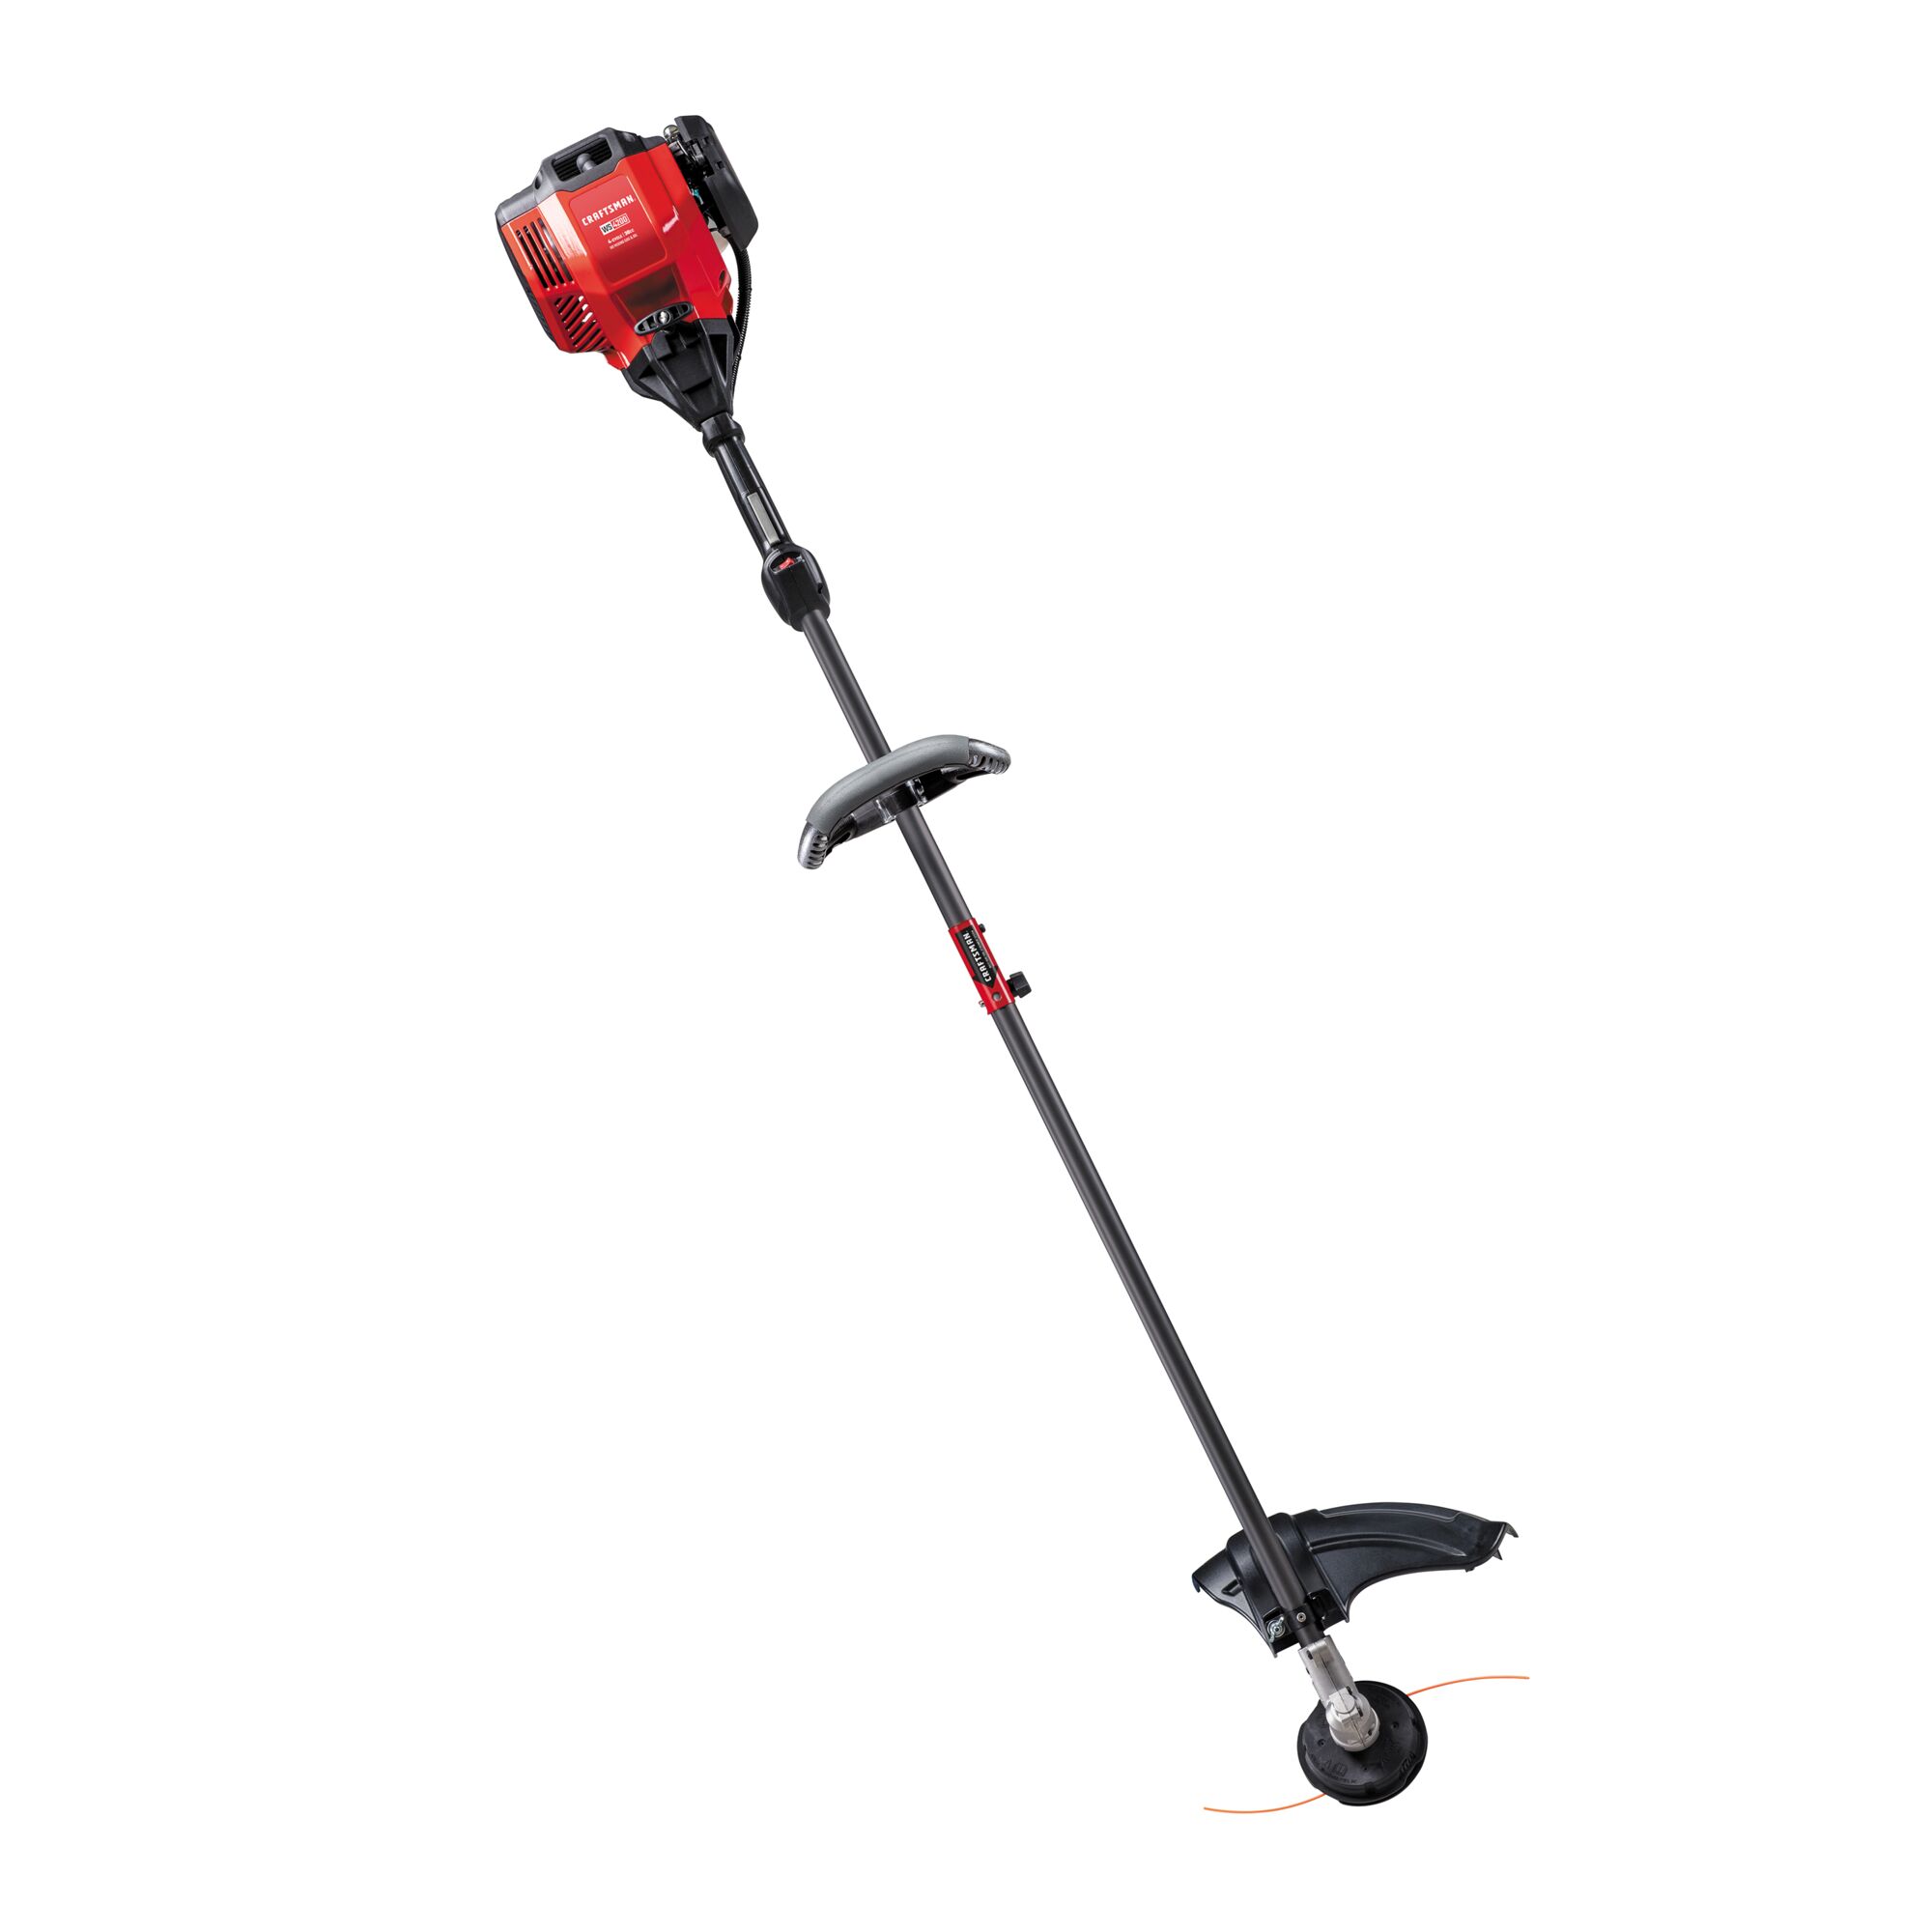 Left profile of  Weedwacker 30 C C 4 cycle 17 inch attachment capable straight shaft gas trimmer.